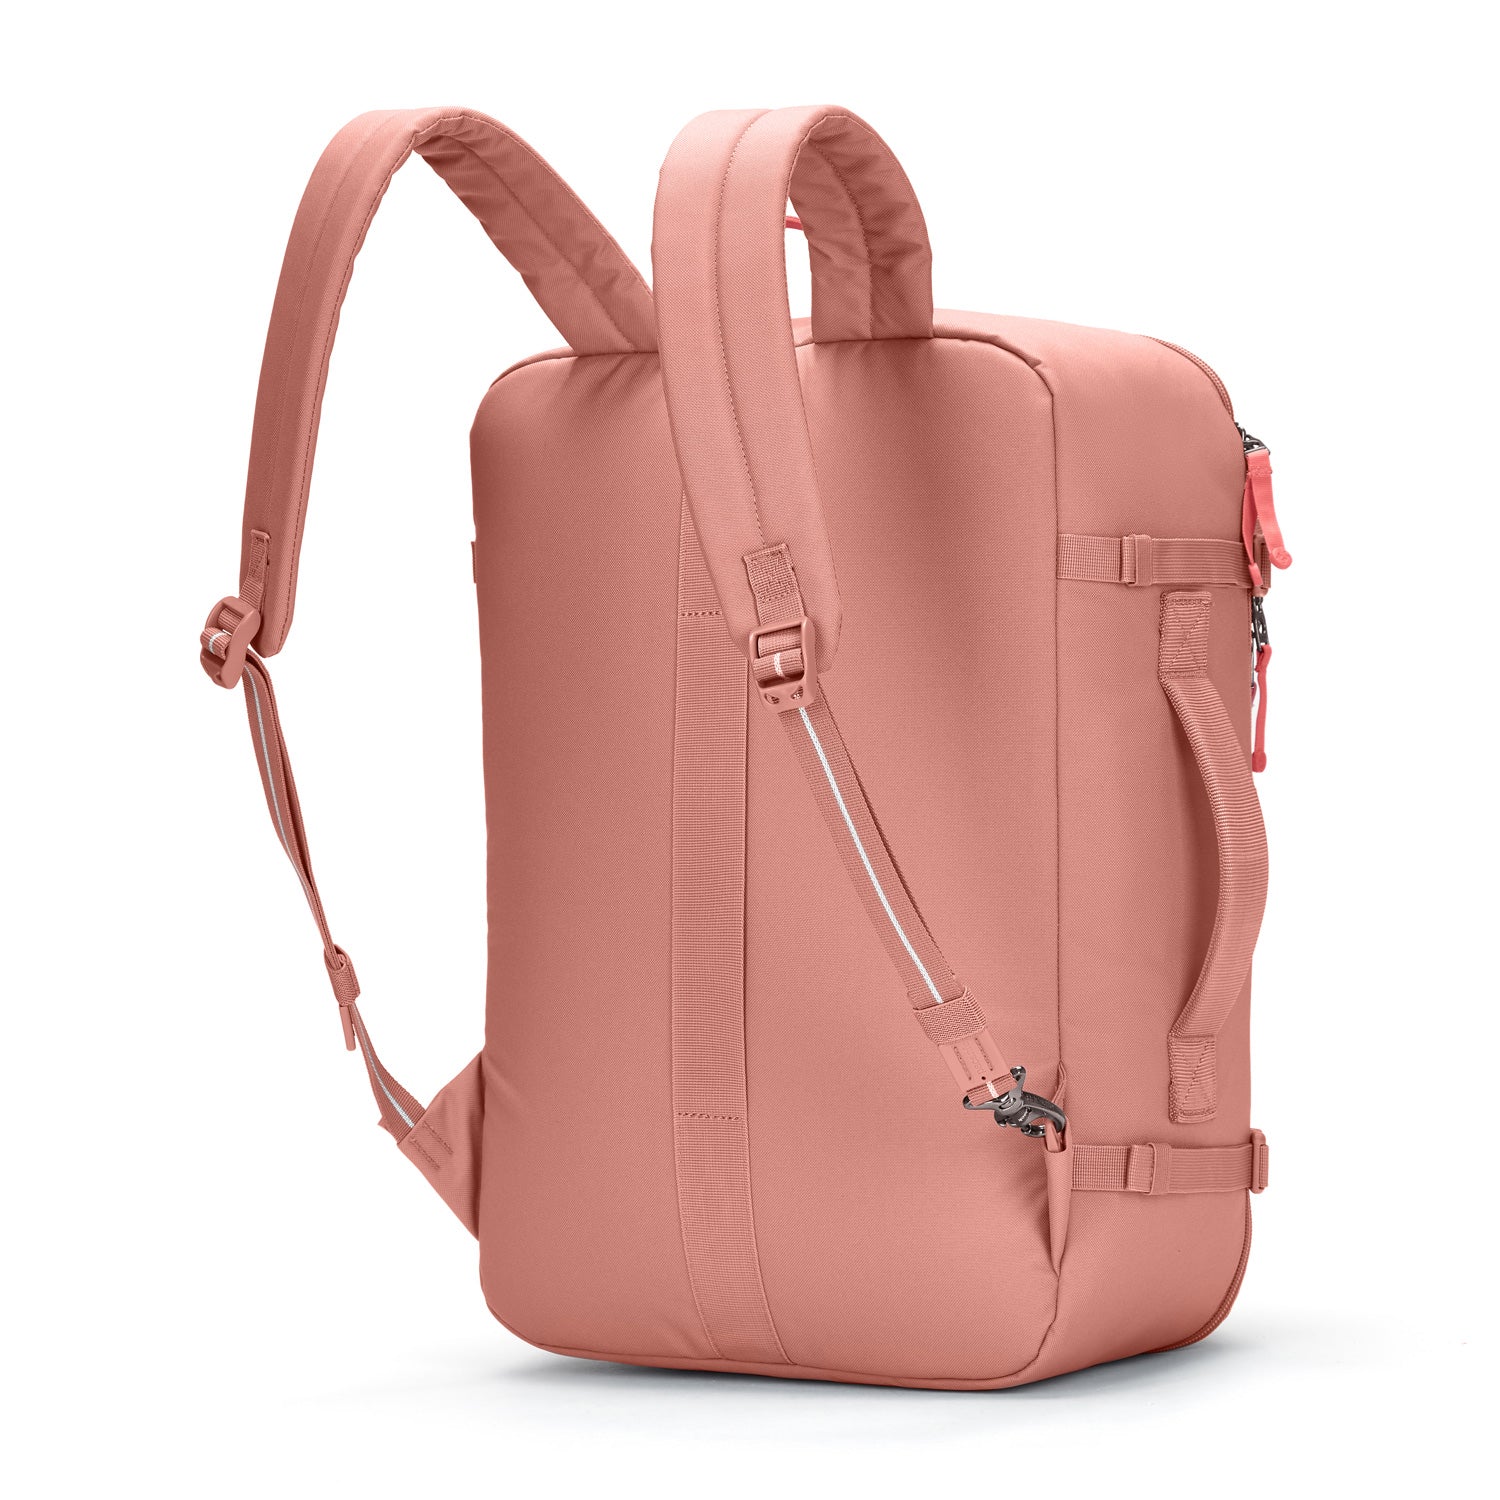 Pacsafe - Pacsafe GO Carry-on Backpack 34L - Rose-4